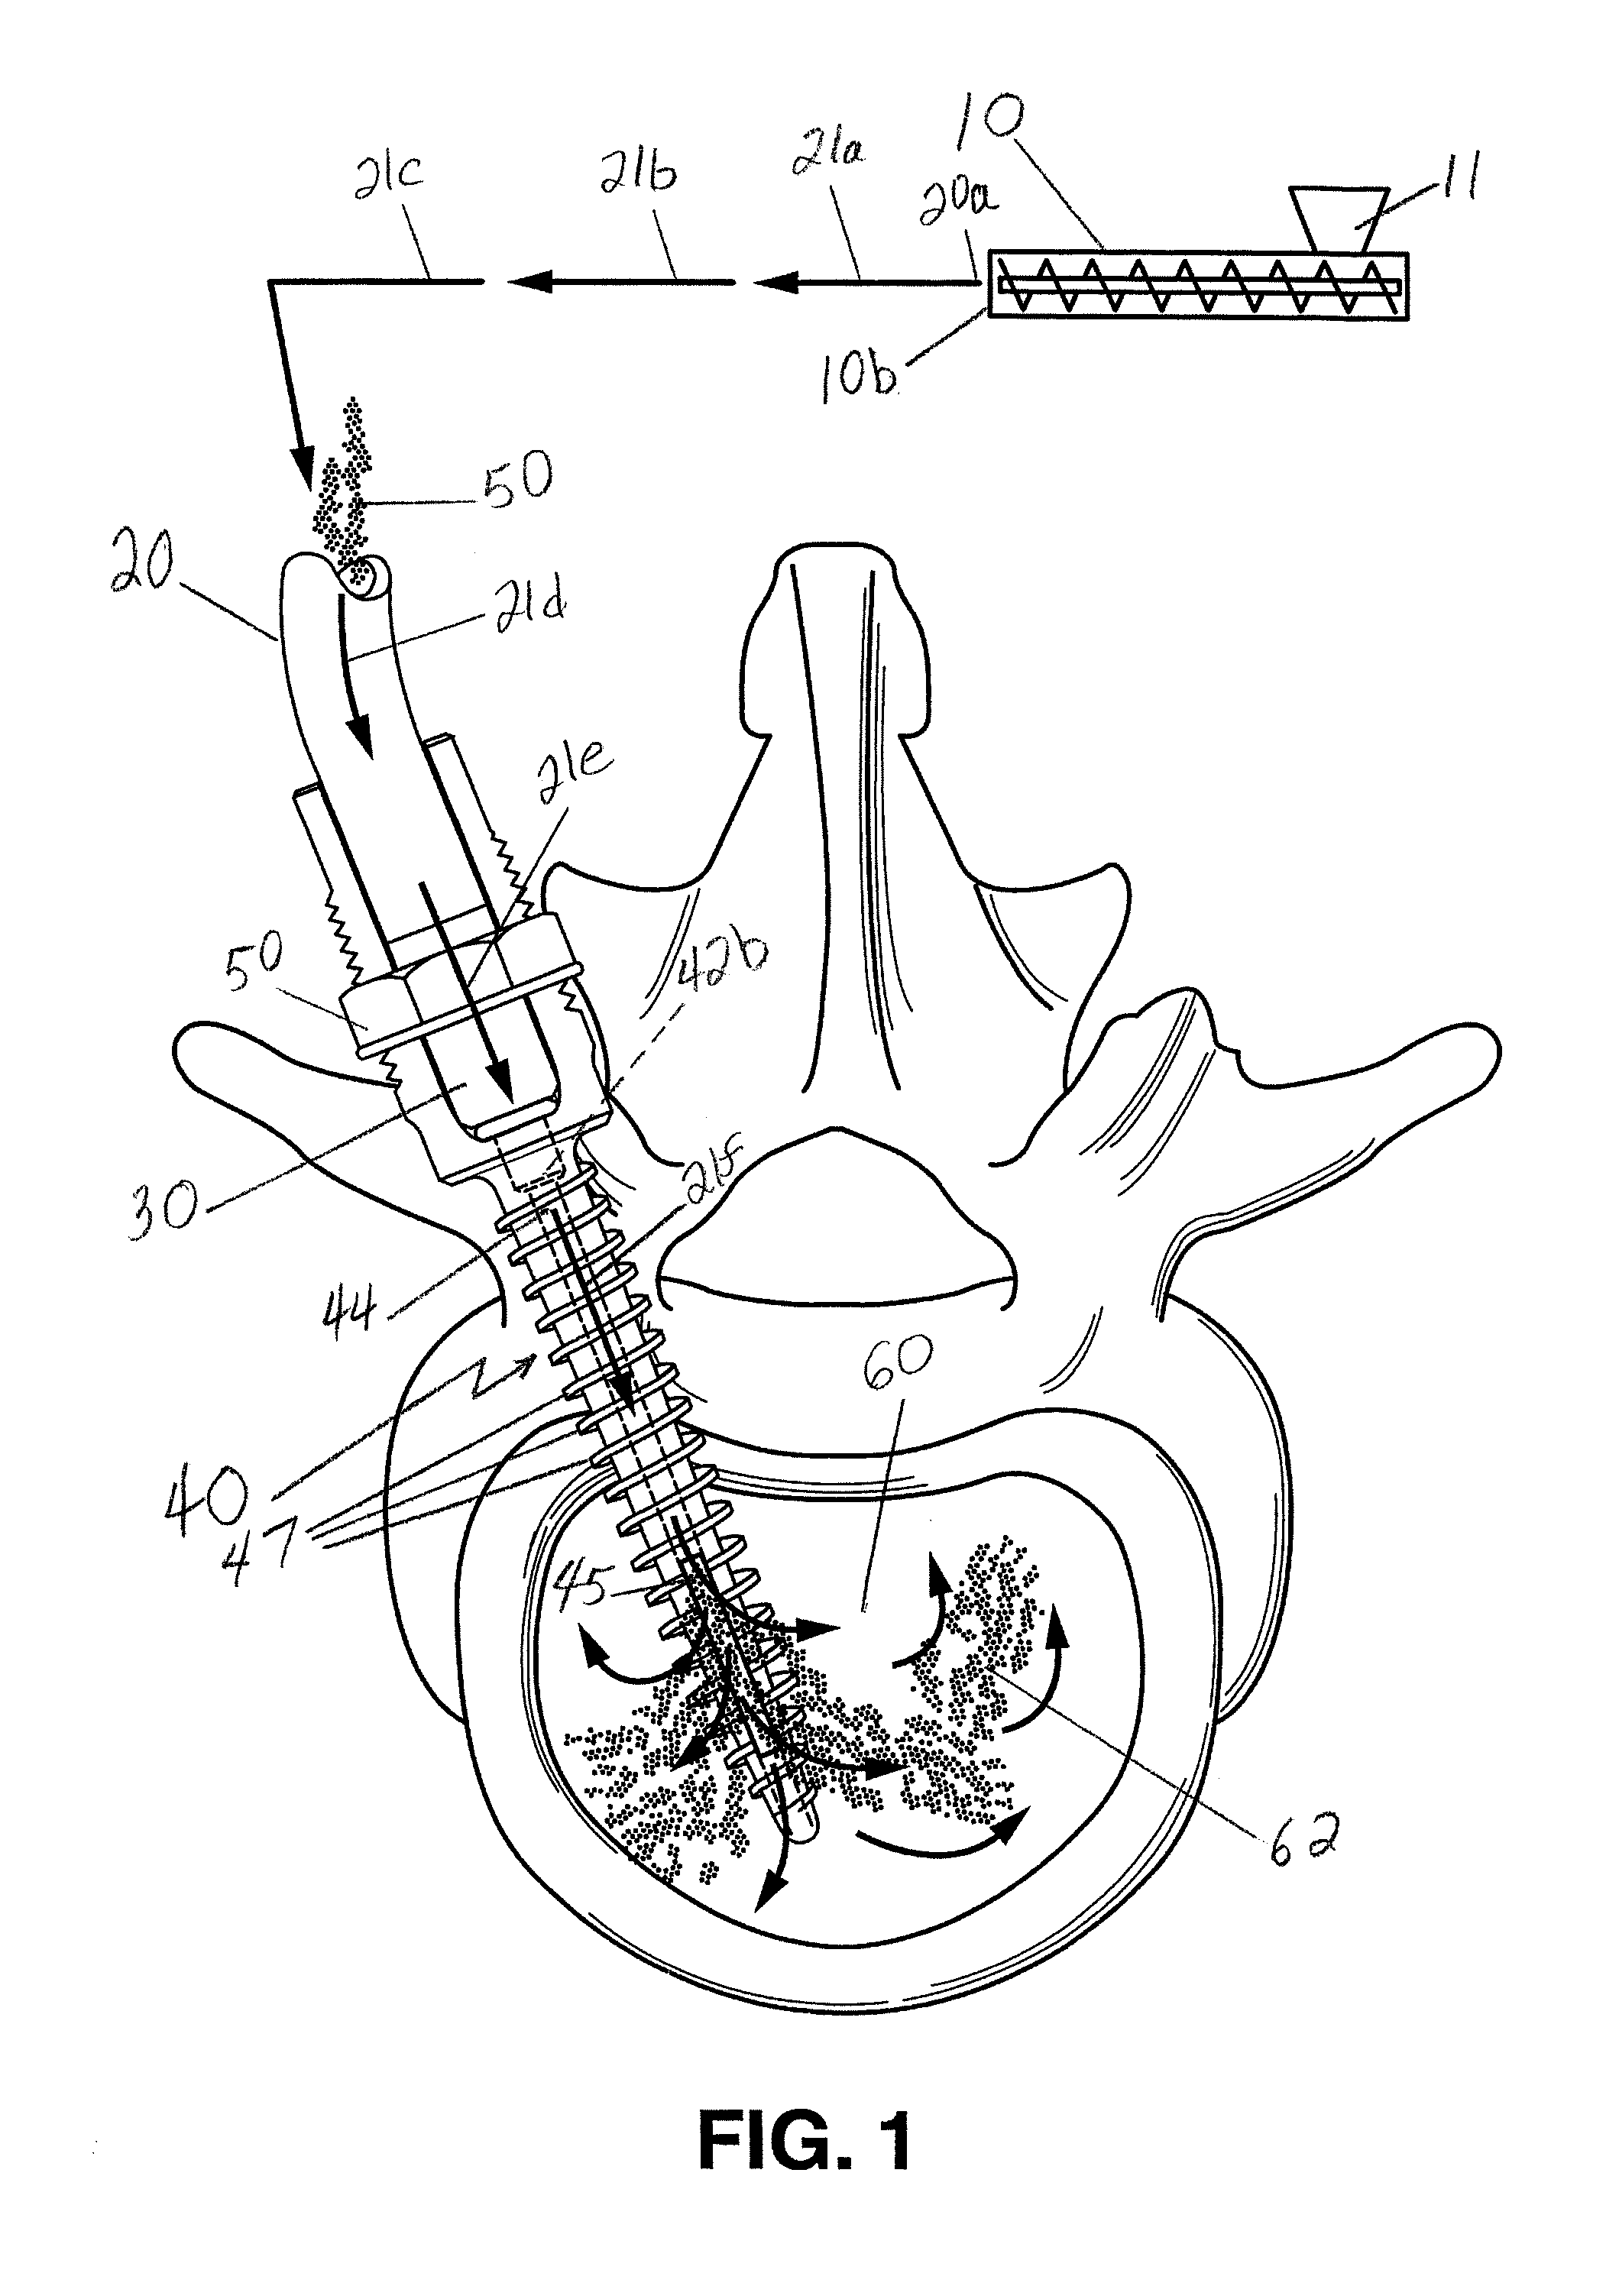 Method and apparatus for anchoring bone screws and injecting many types of high viscosity materials in areas surrounding bone